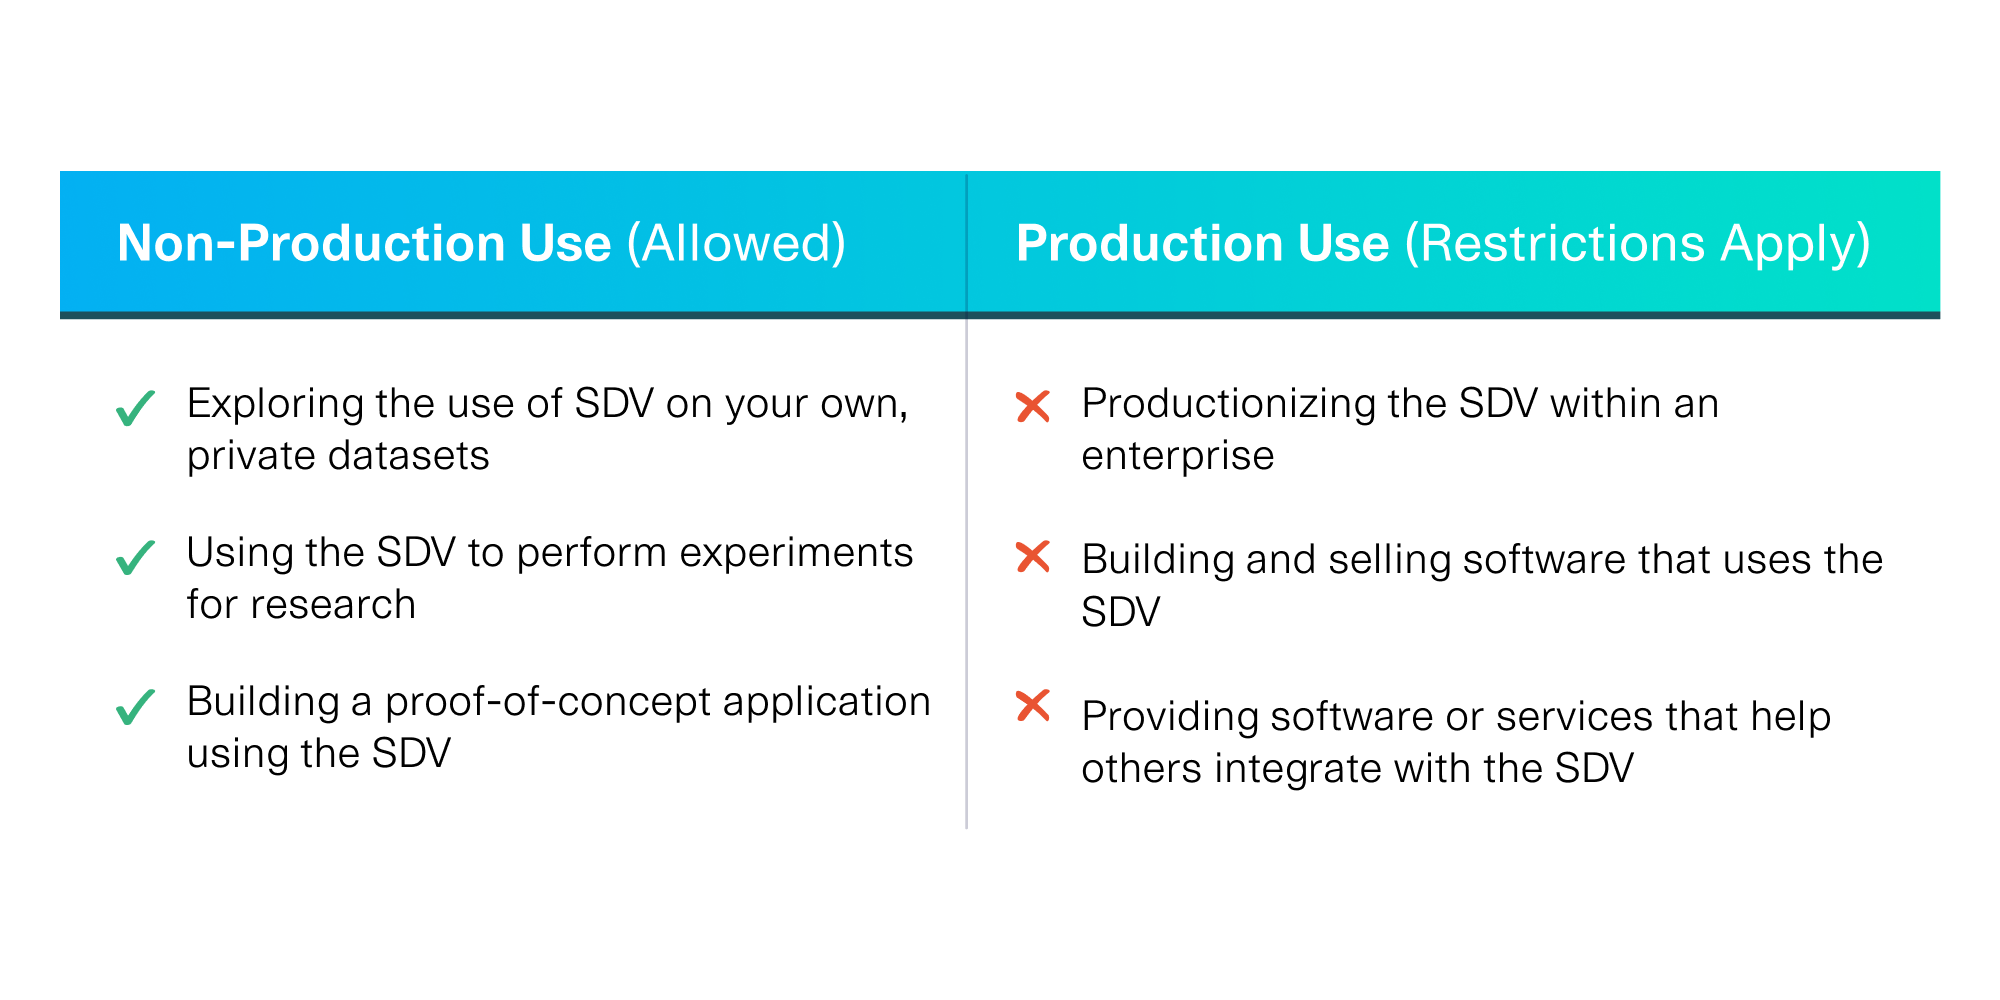 Why we changed the SDV license to BSL (and how that impacts our users)